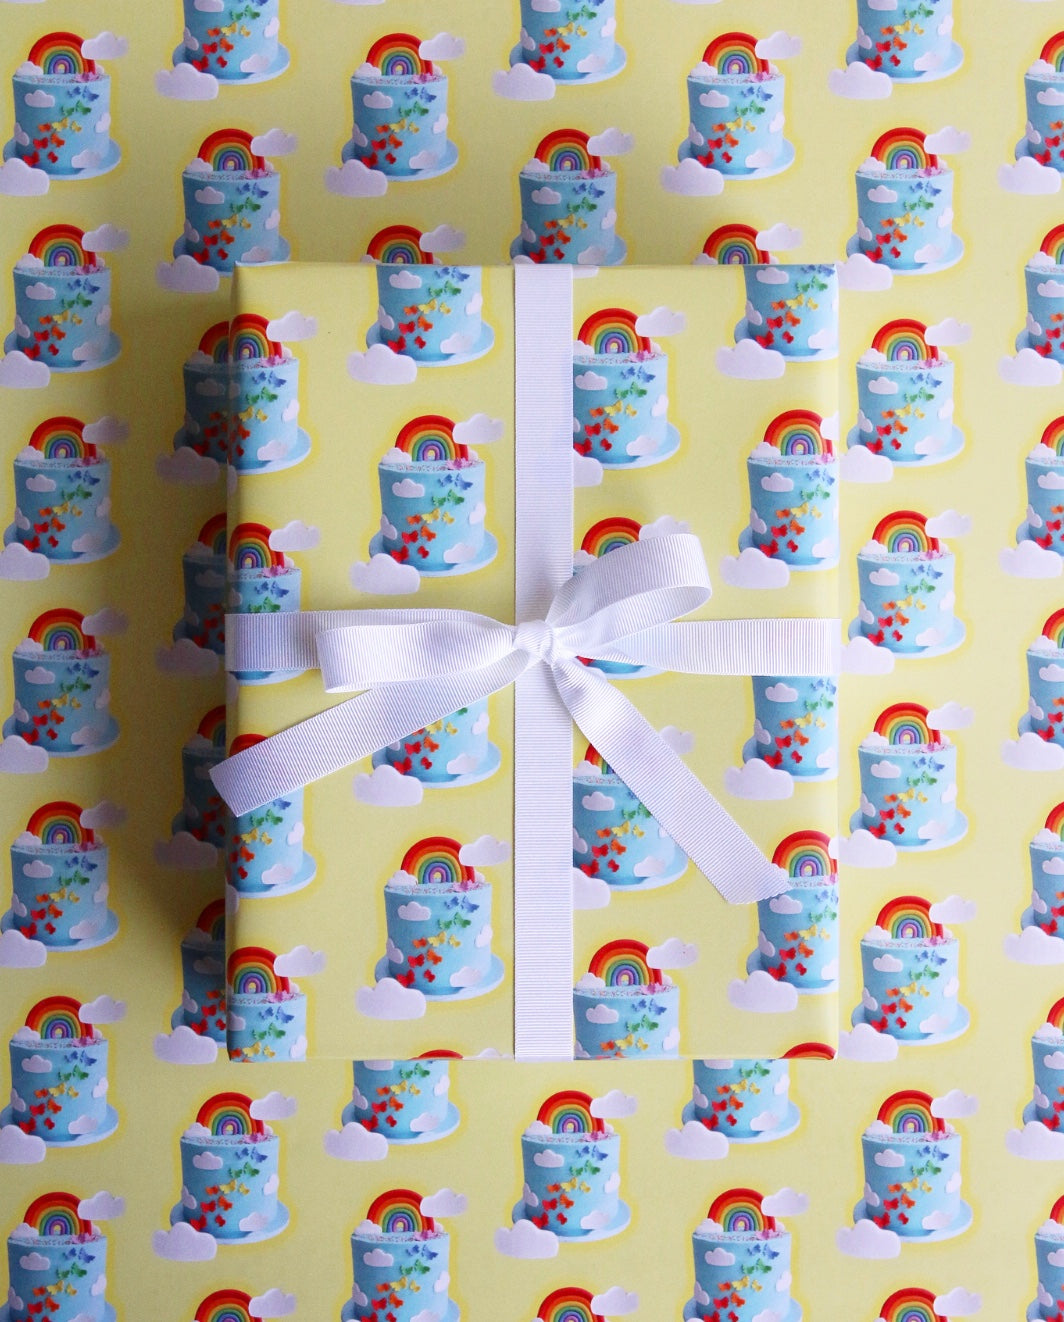 Rainbow Cake Wrapping Paper tied with Ribbon